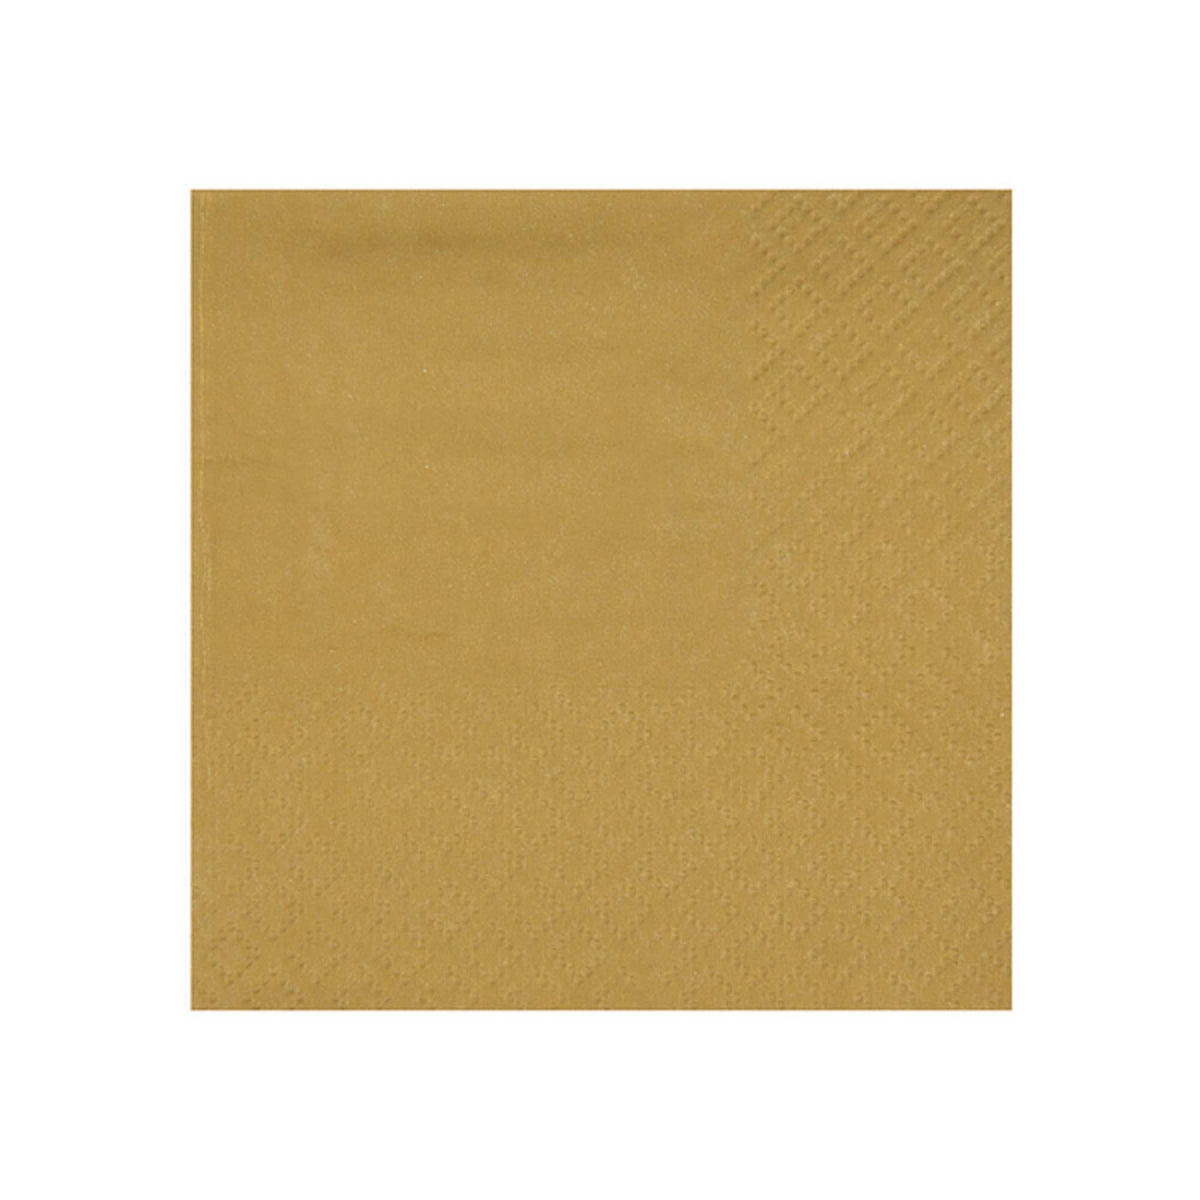 SANTEX Everyday Entertaining Gold Small Beverage Napkins, 25 Count 3660380078975